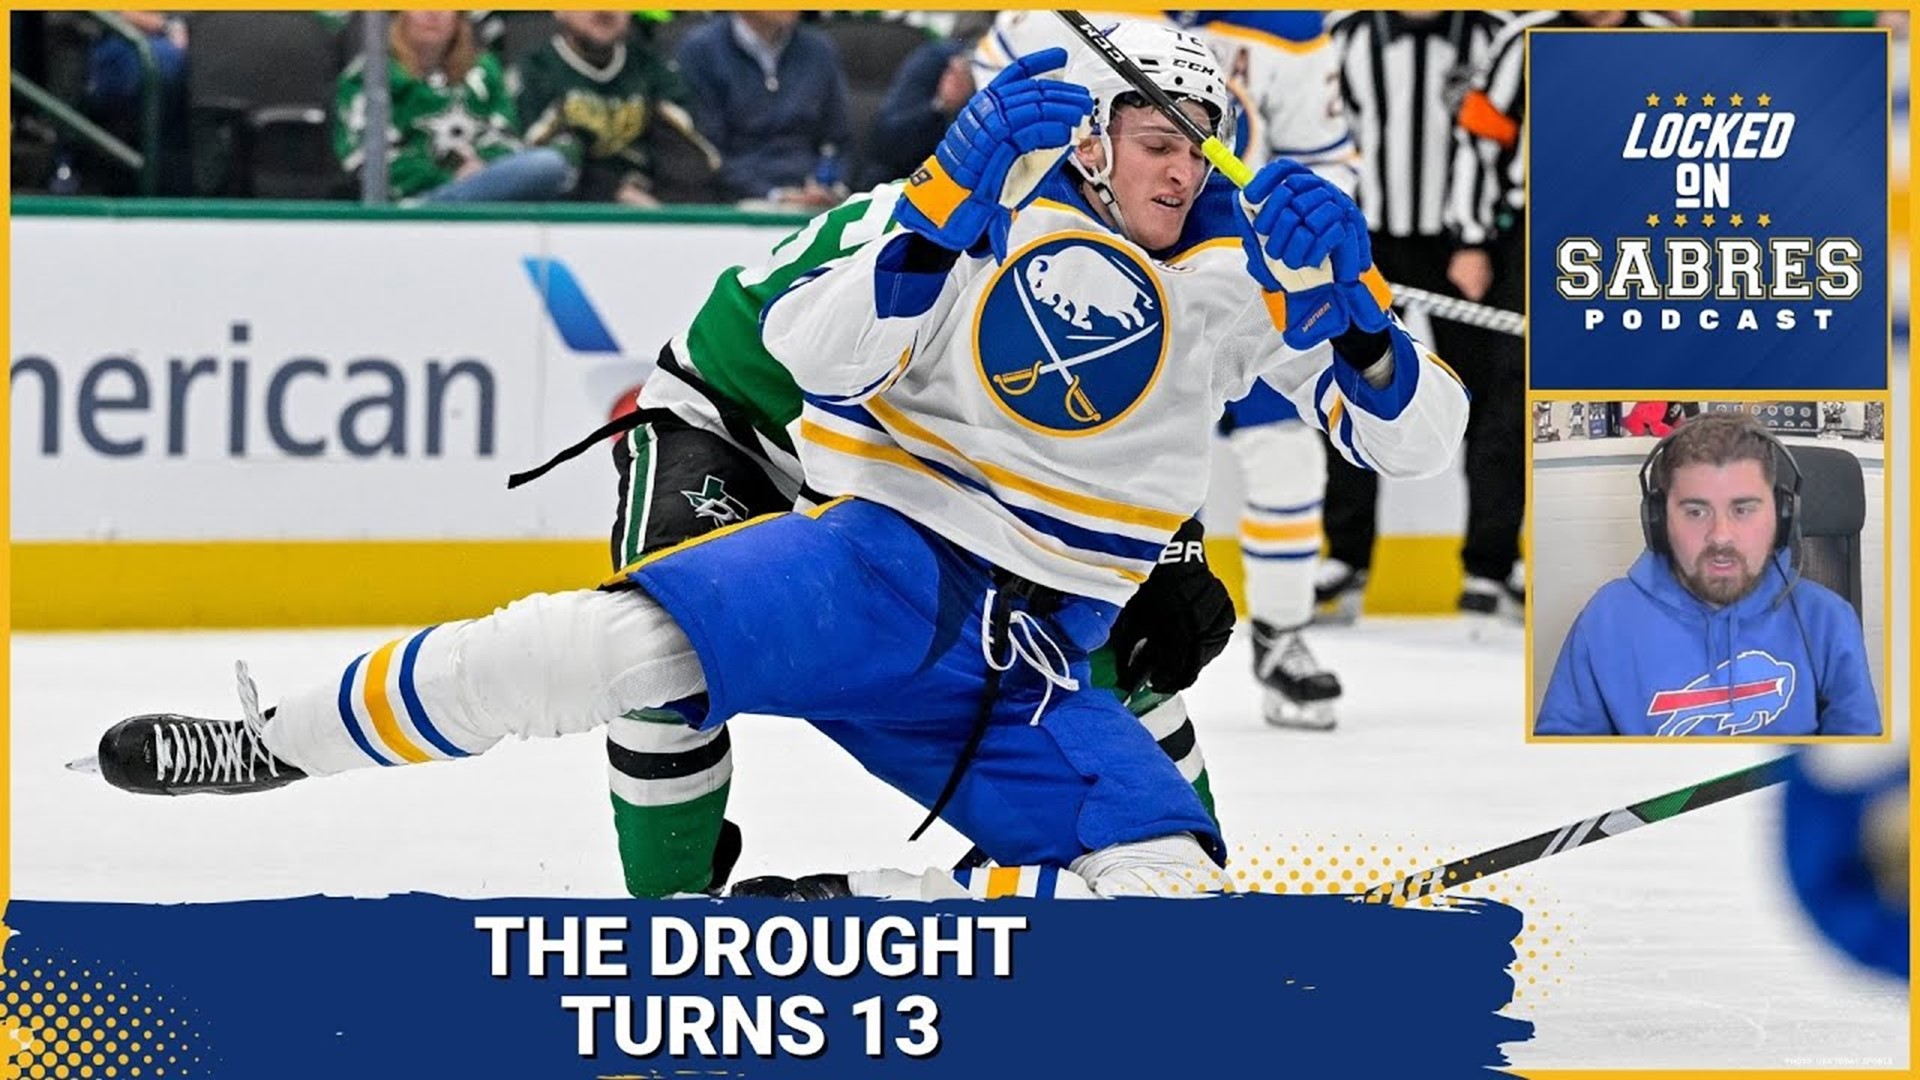 The Sabres playoff drought turns 13 years old